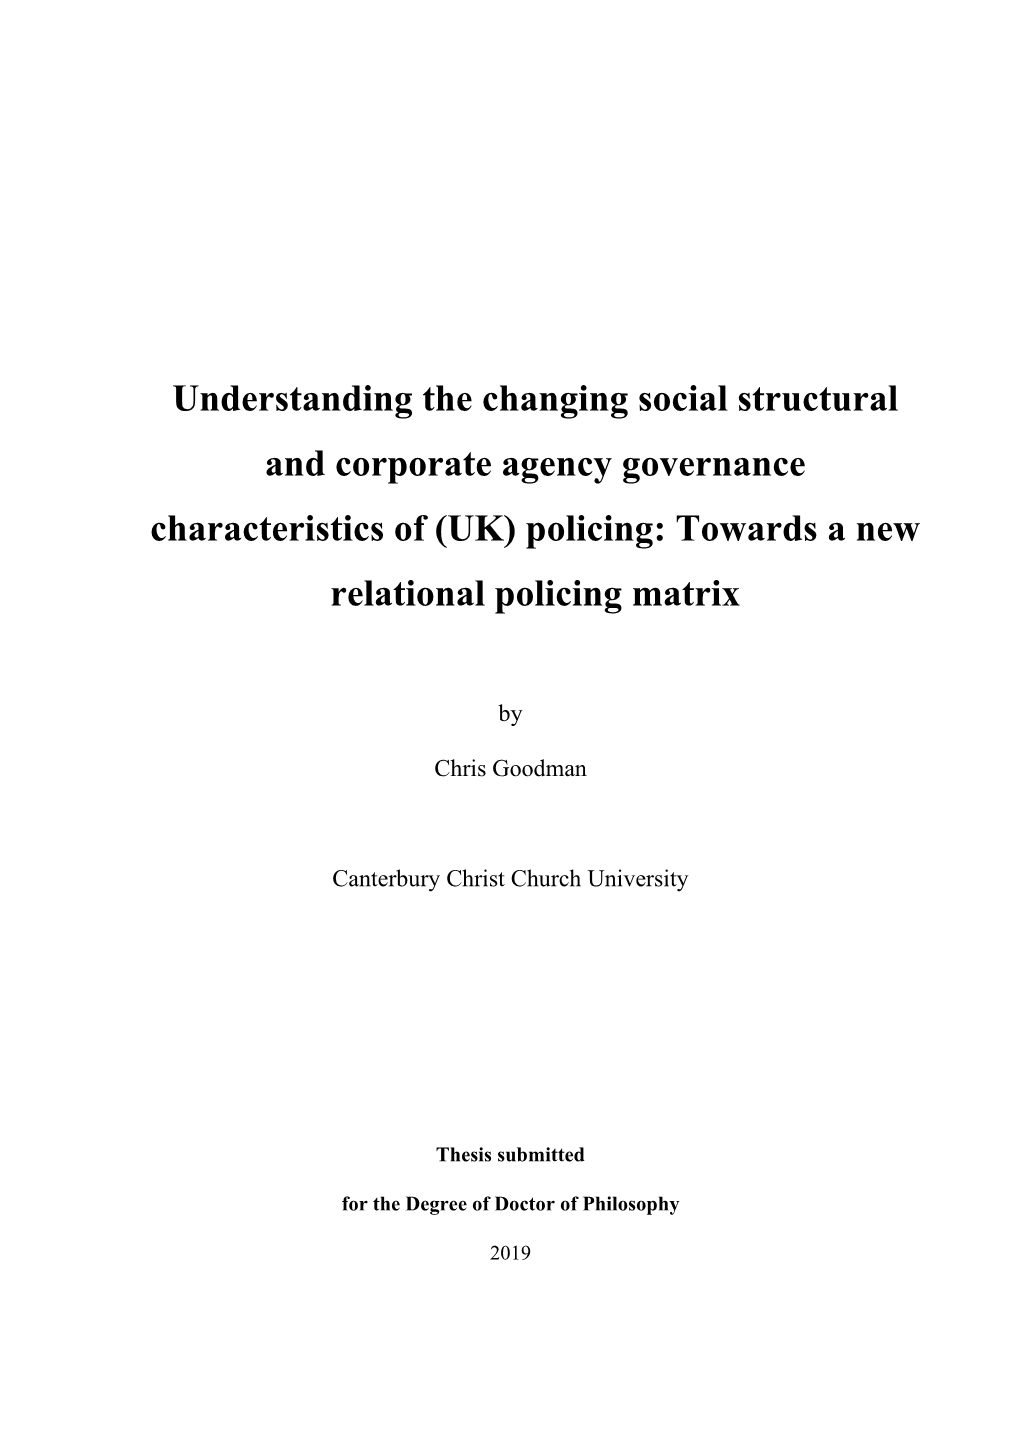 Understanding the Changing Social Structural and Corporate Agency Governance Characteristics of (UK) Policing: Towards a New Relational Policing Matrix